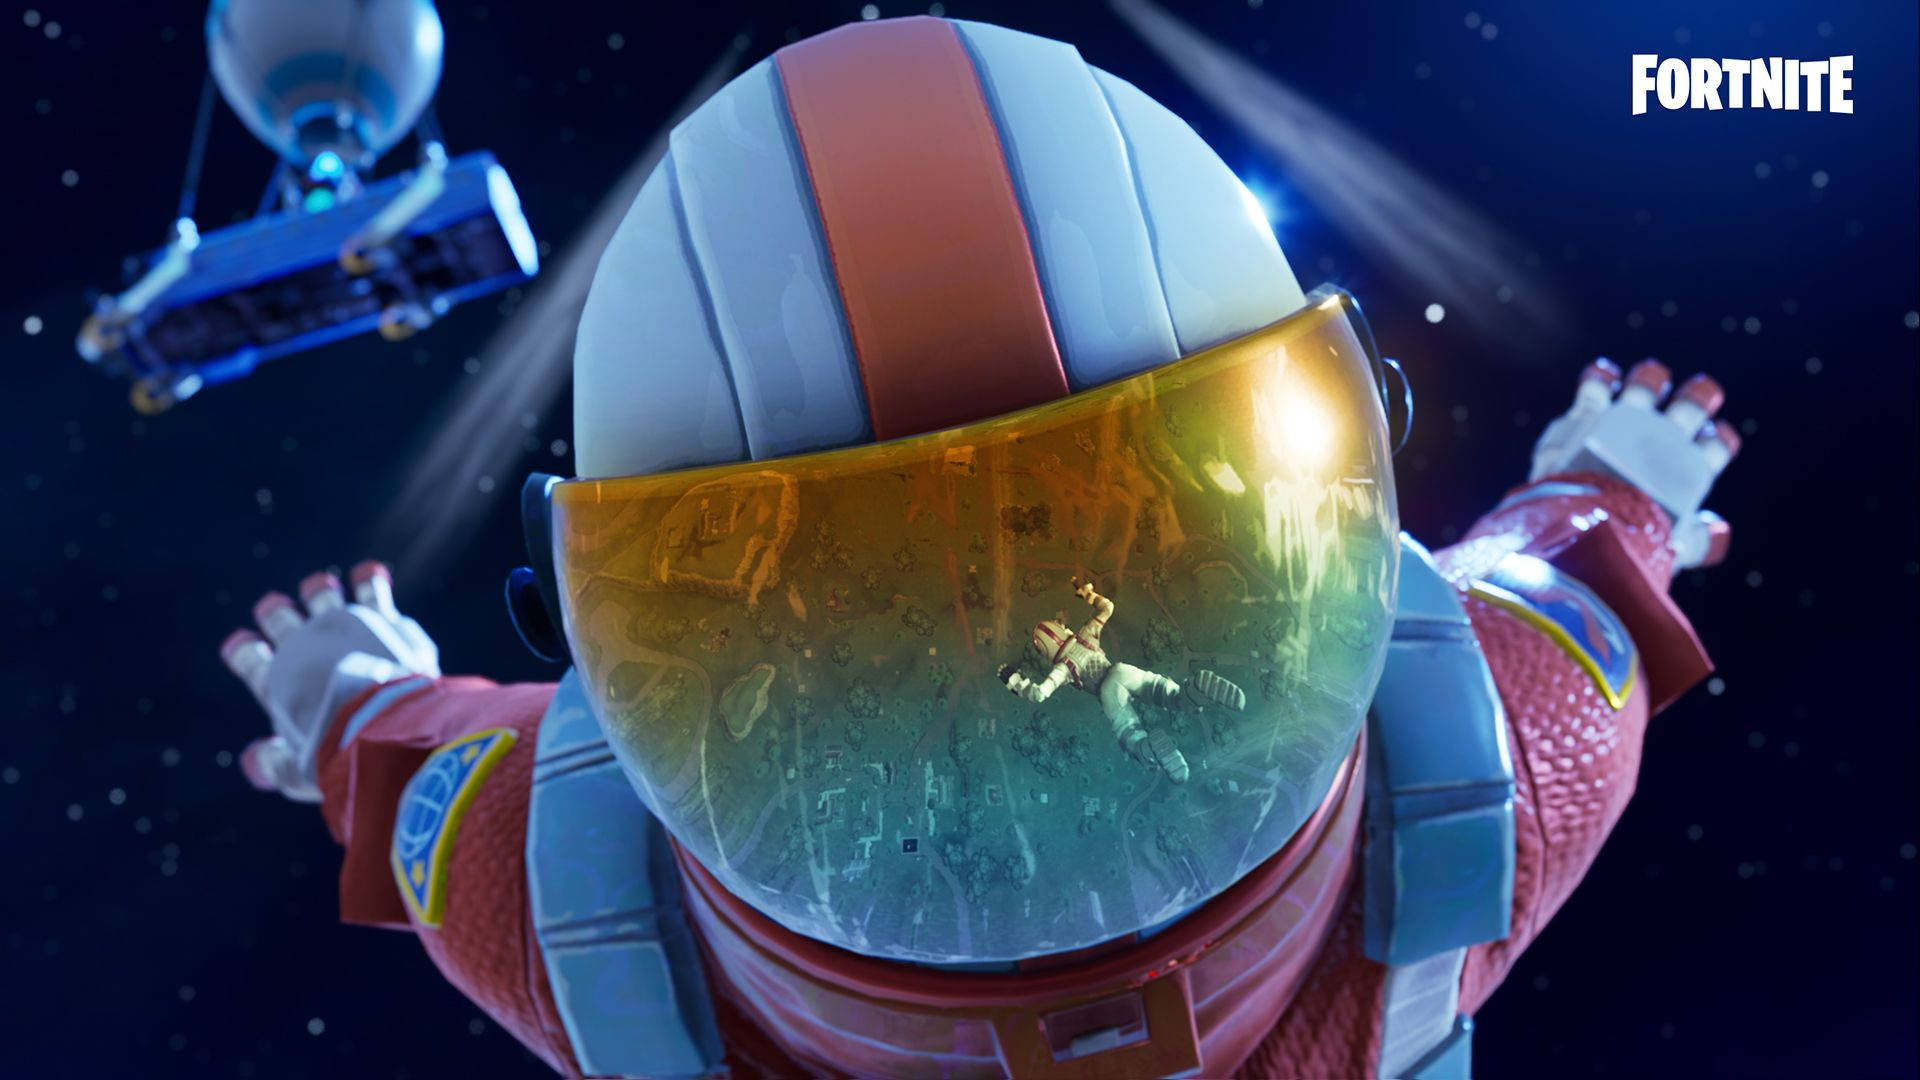 Mission Specialist Fortnite Thumbnails